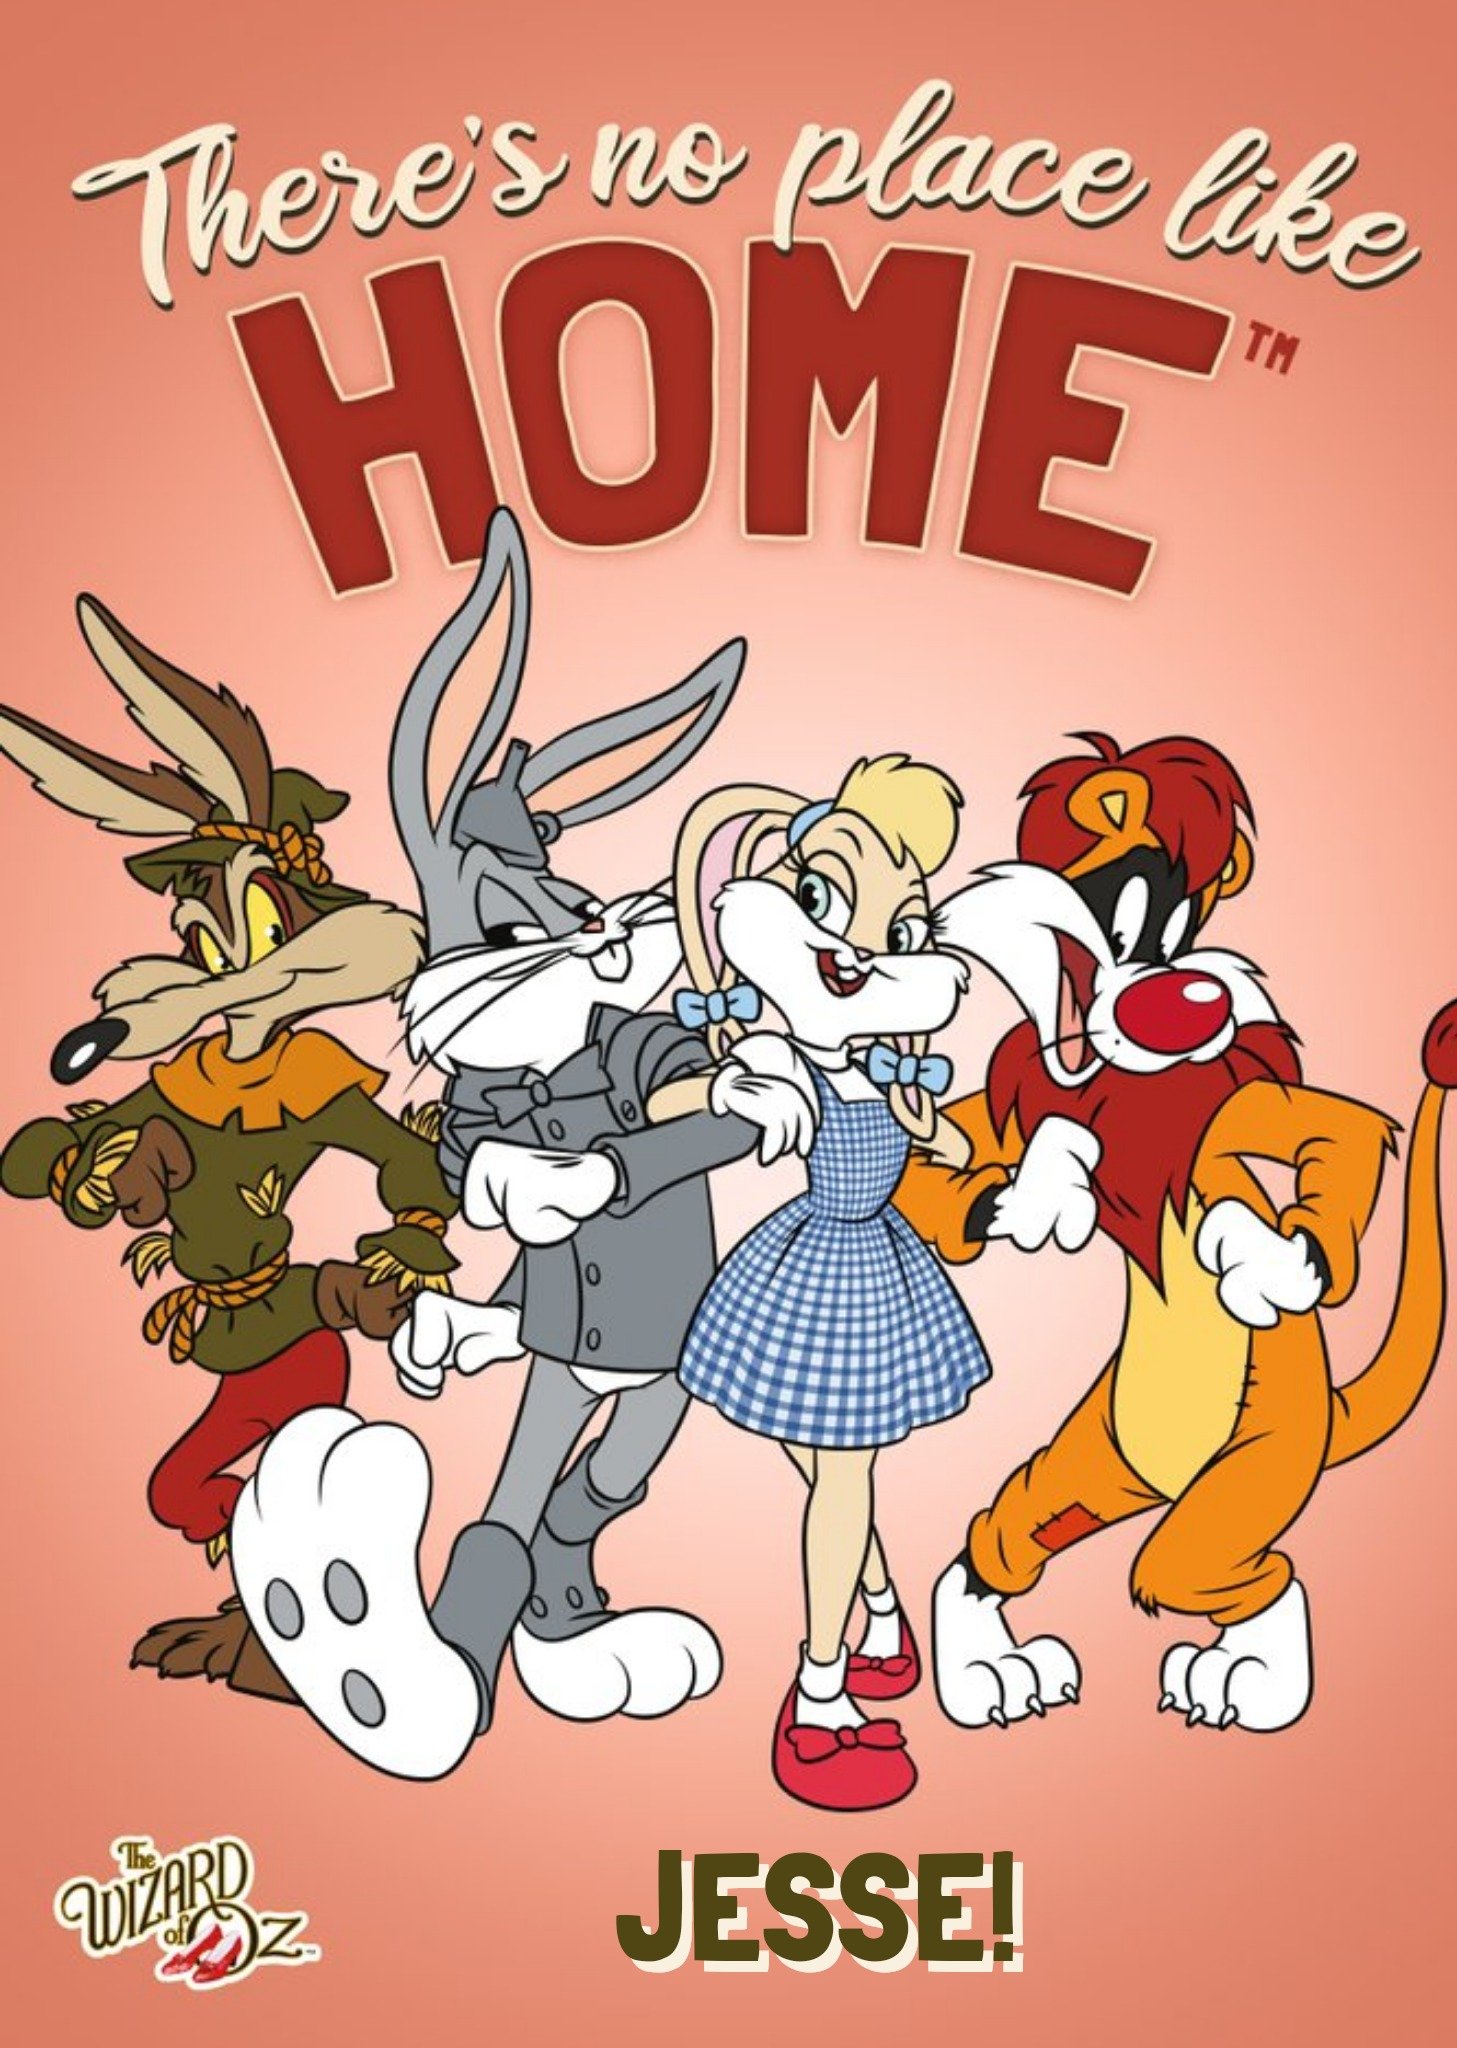 Moonpig Warner Brothers 100 There's No Place Like Home Card, Large